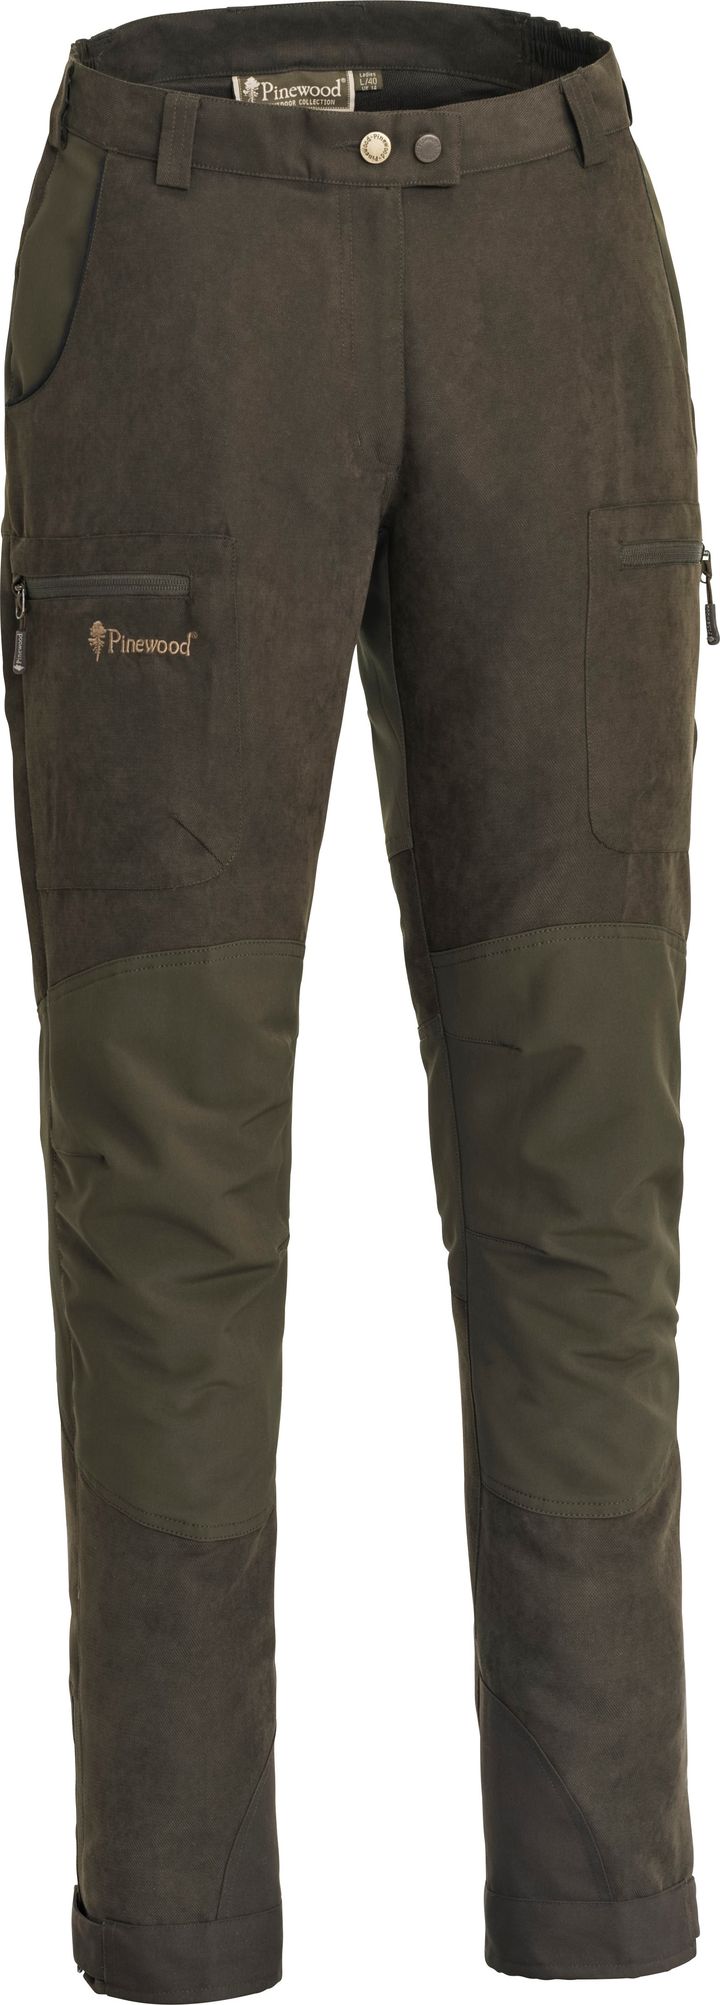 Women's Caribou Hunt Extreme Pants Suede Brown/D.Olive Pinewood